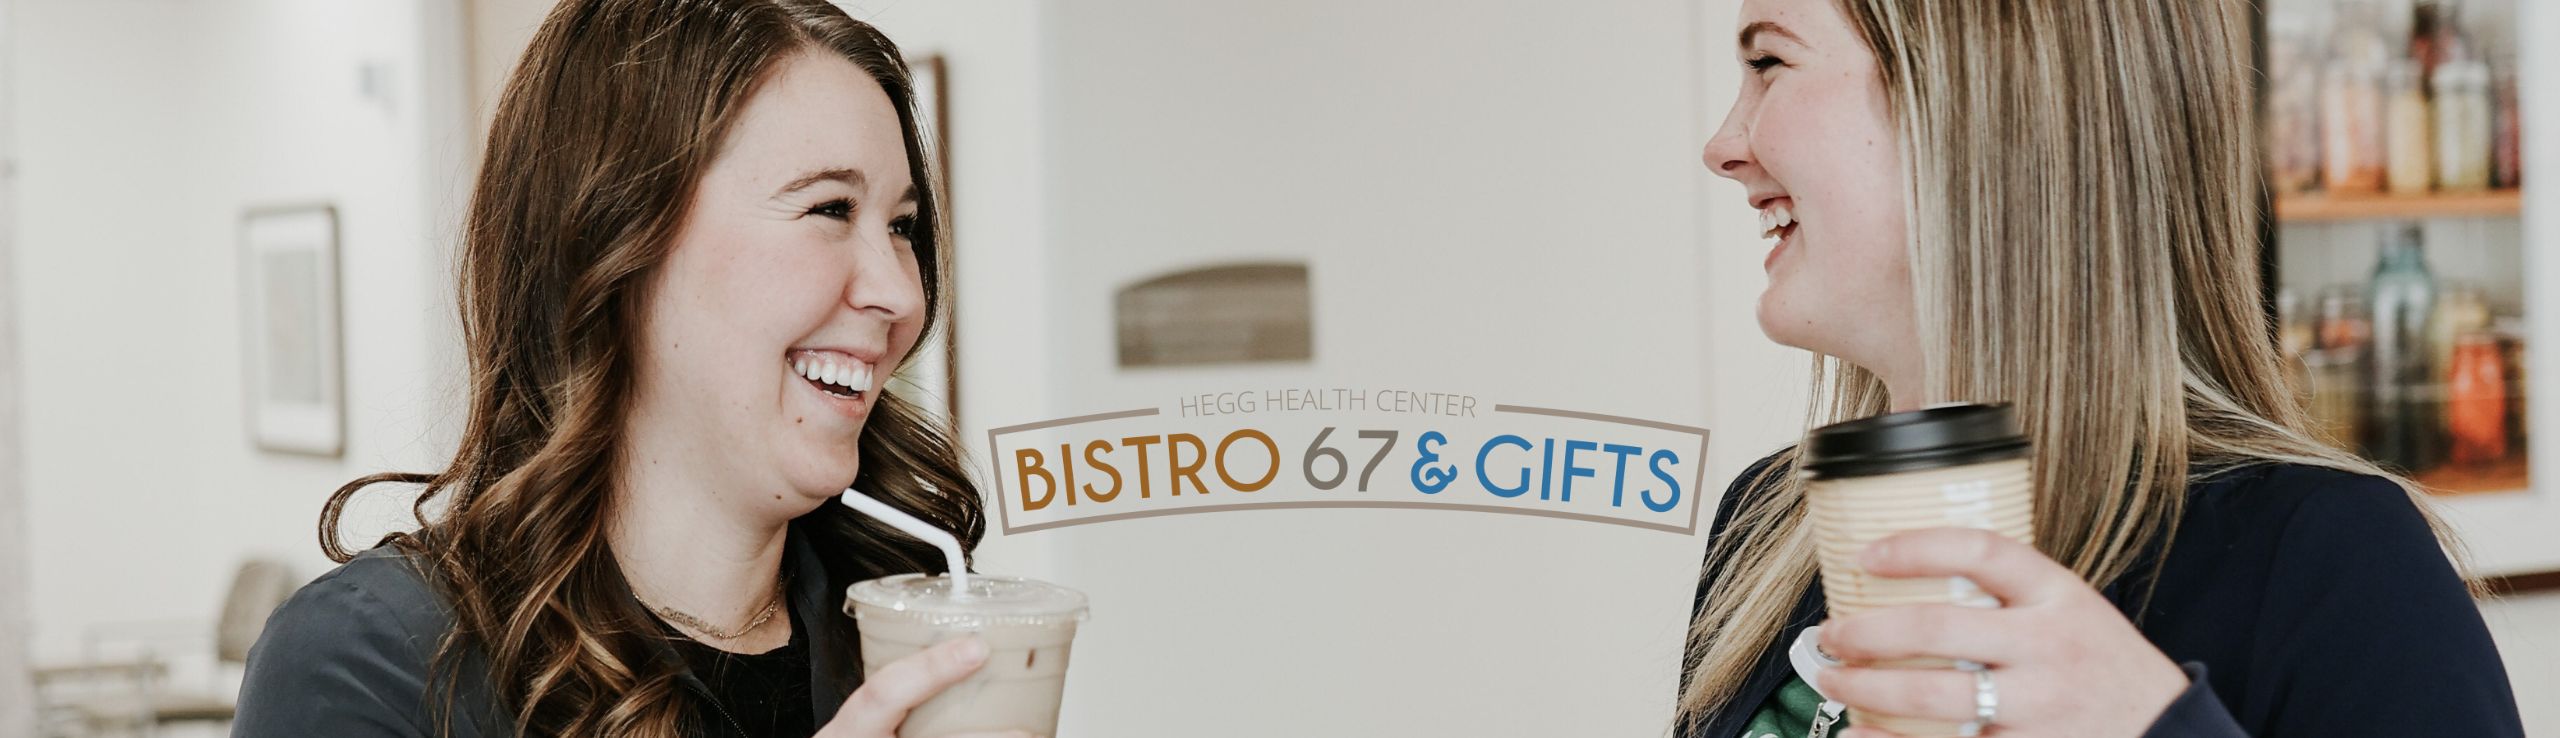 Girls enjoy iced and hot drinks at Bistro 67 at Hegg Health Center in Rock Valley